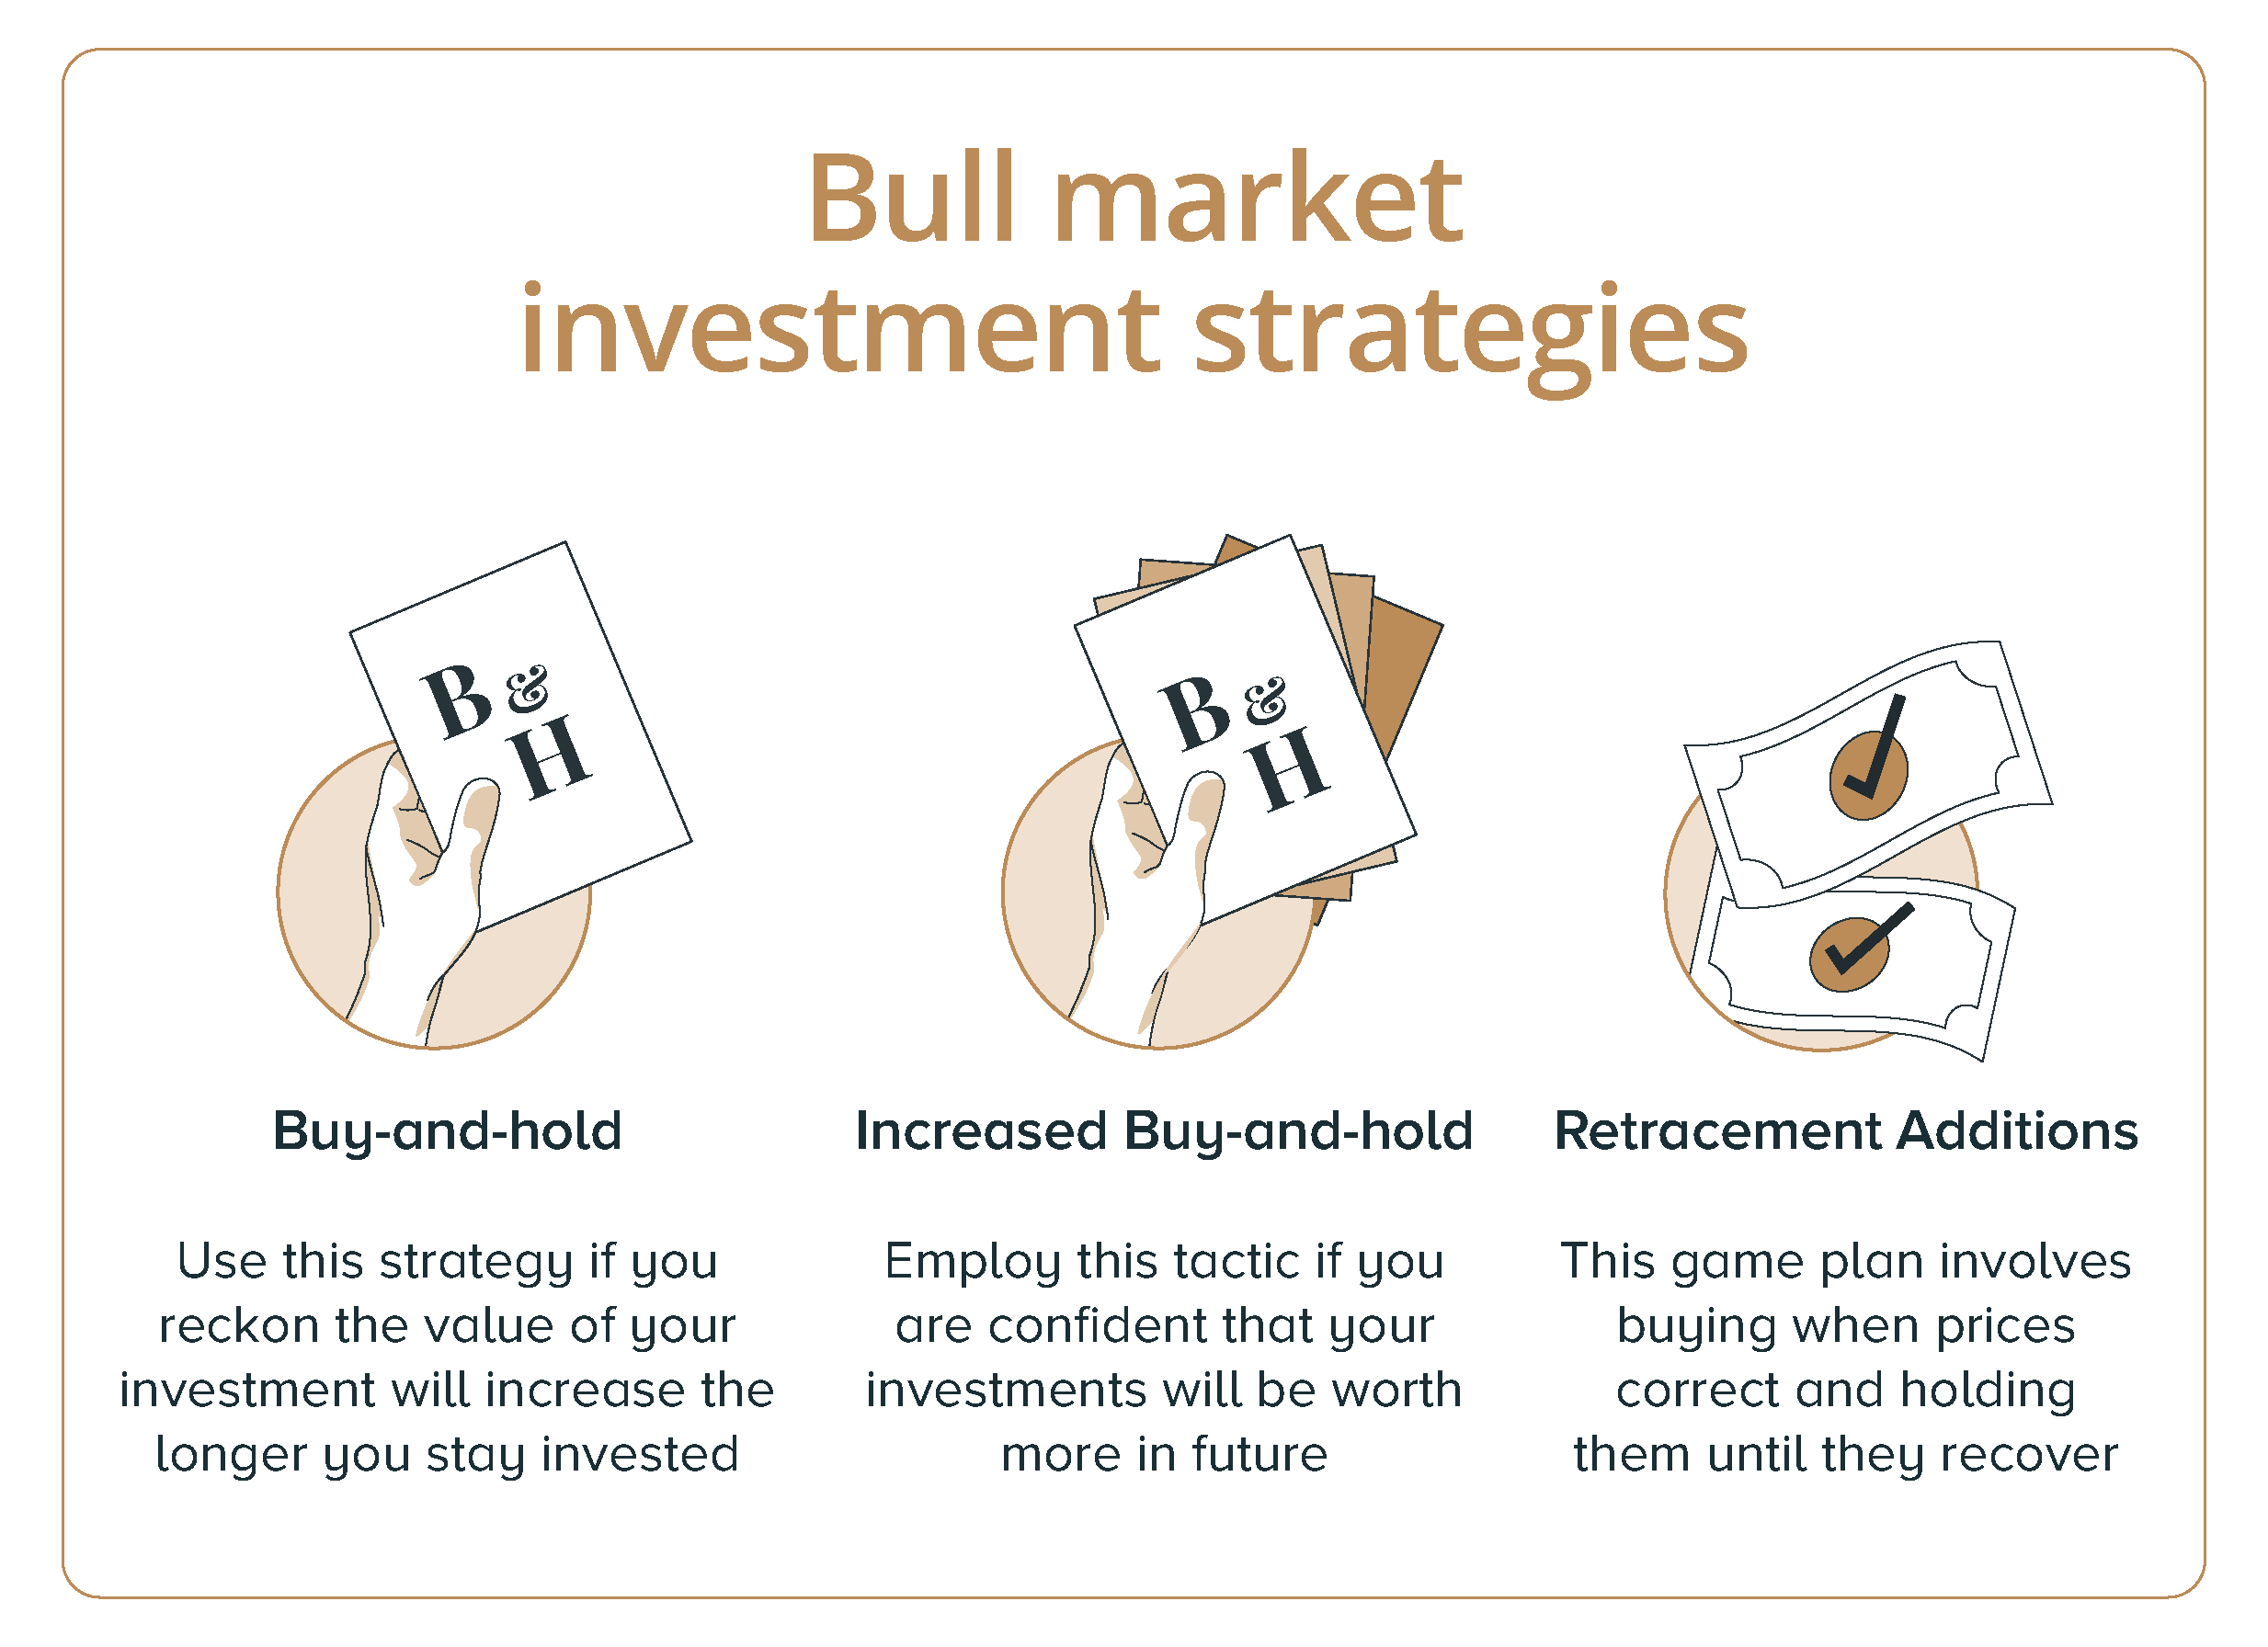 Investment strategies for a bull market